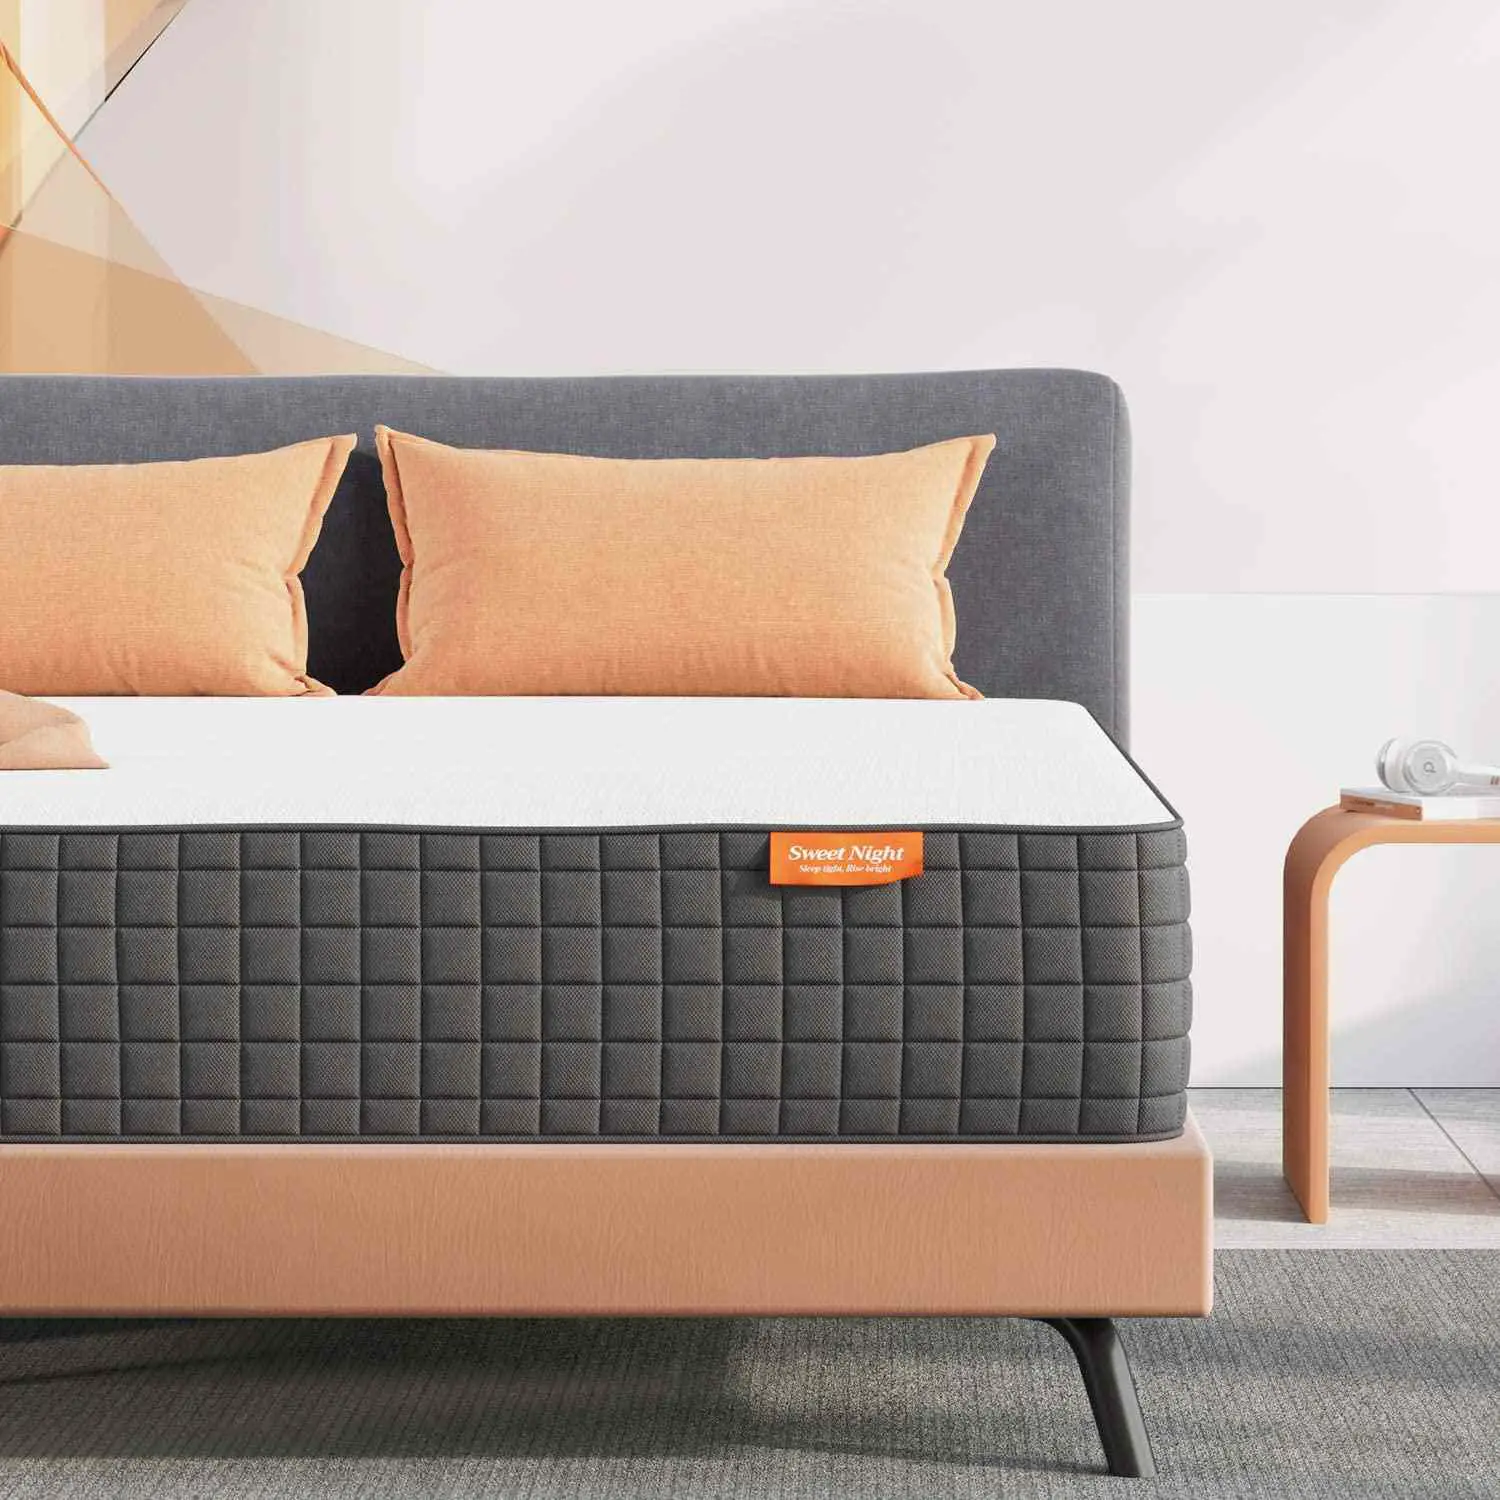 The 7 Best Mattresses for Back Pain of 2021